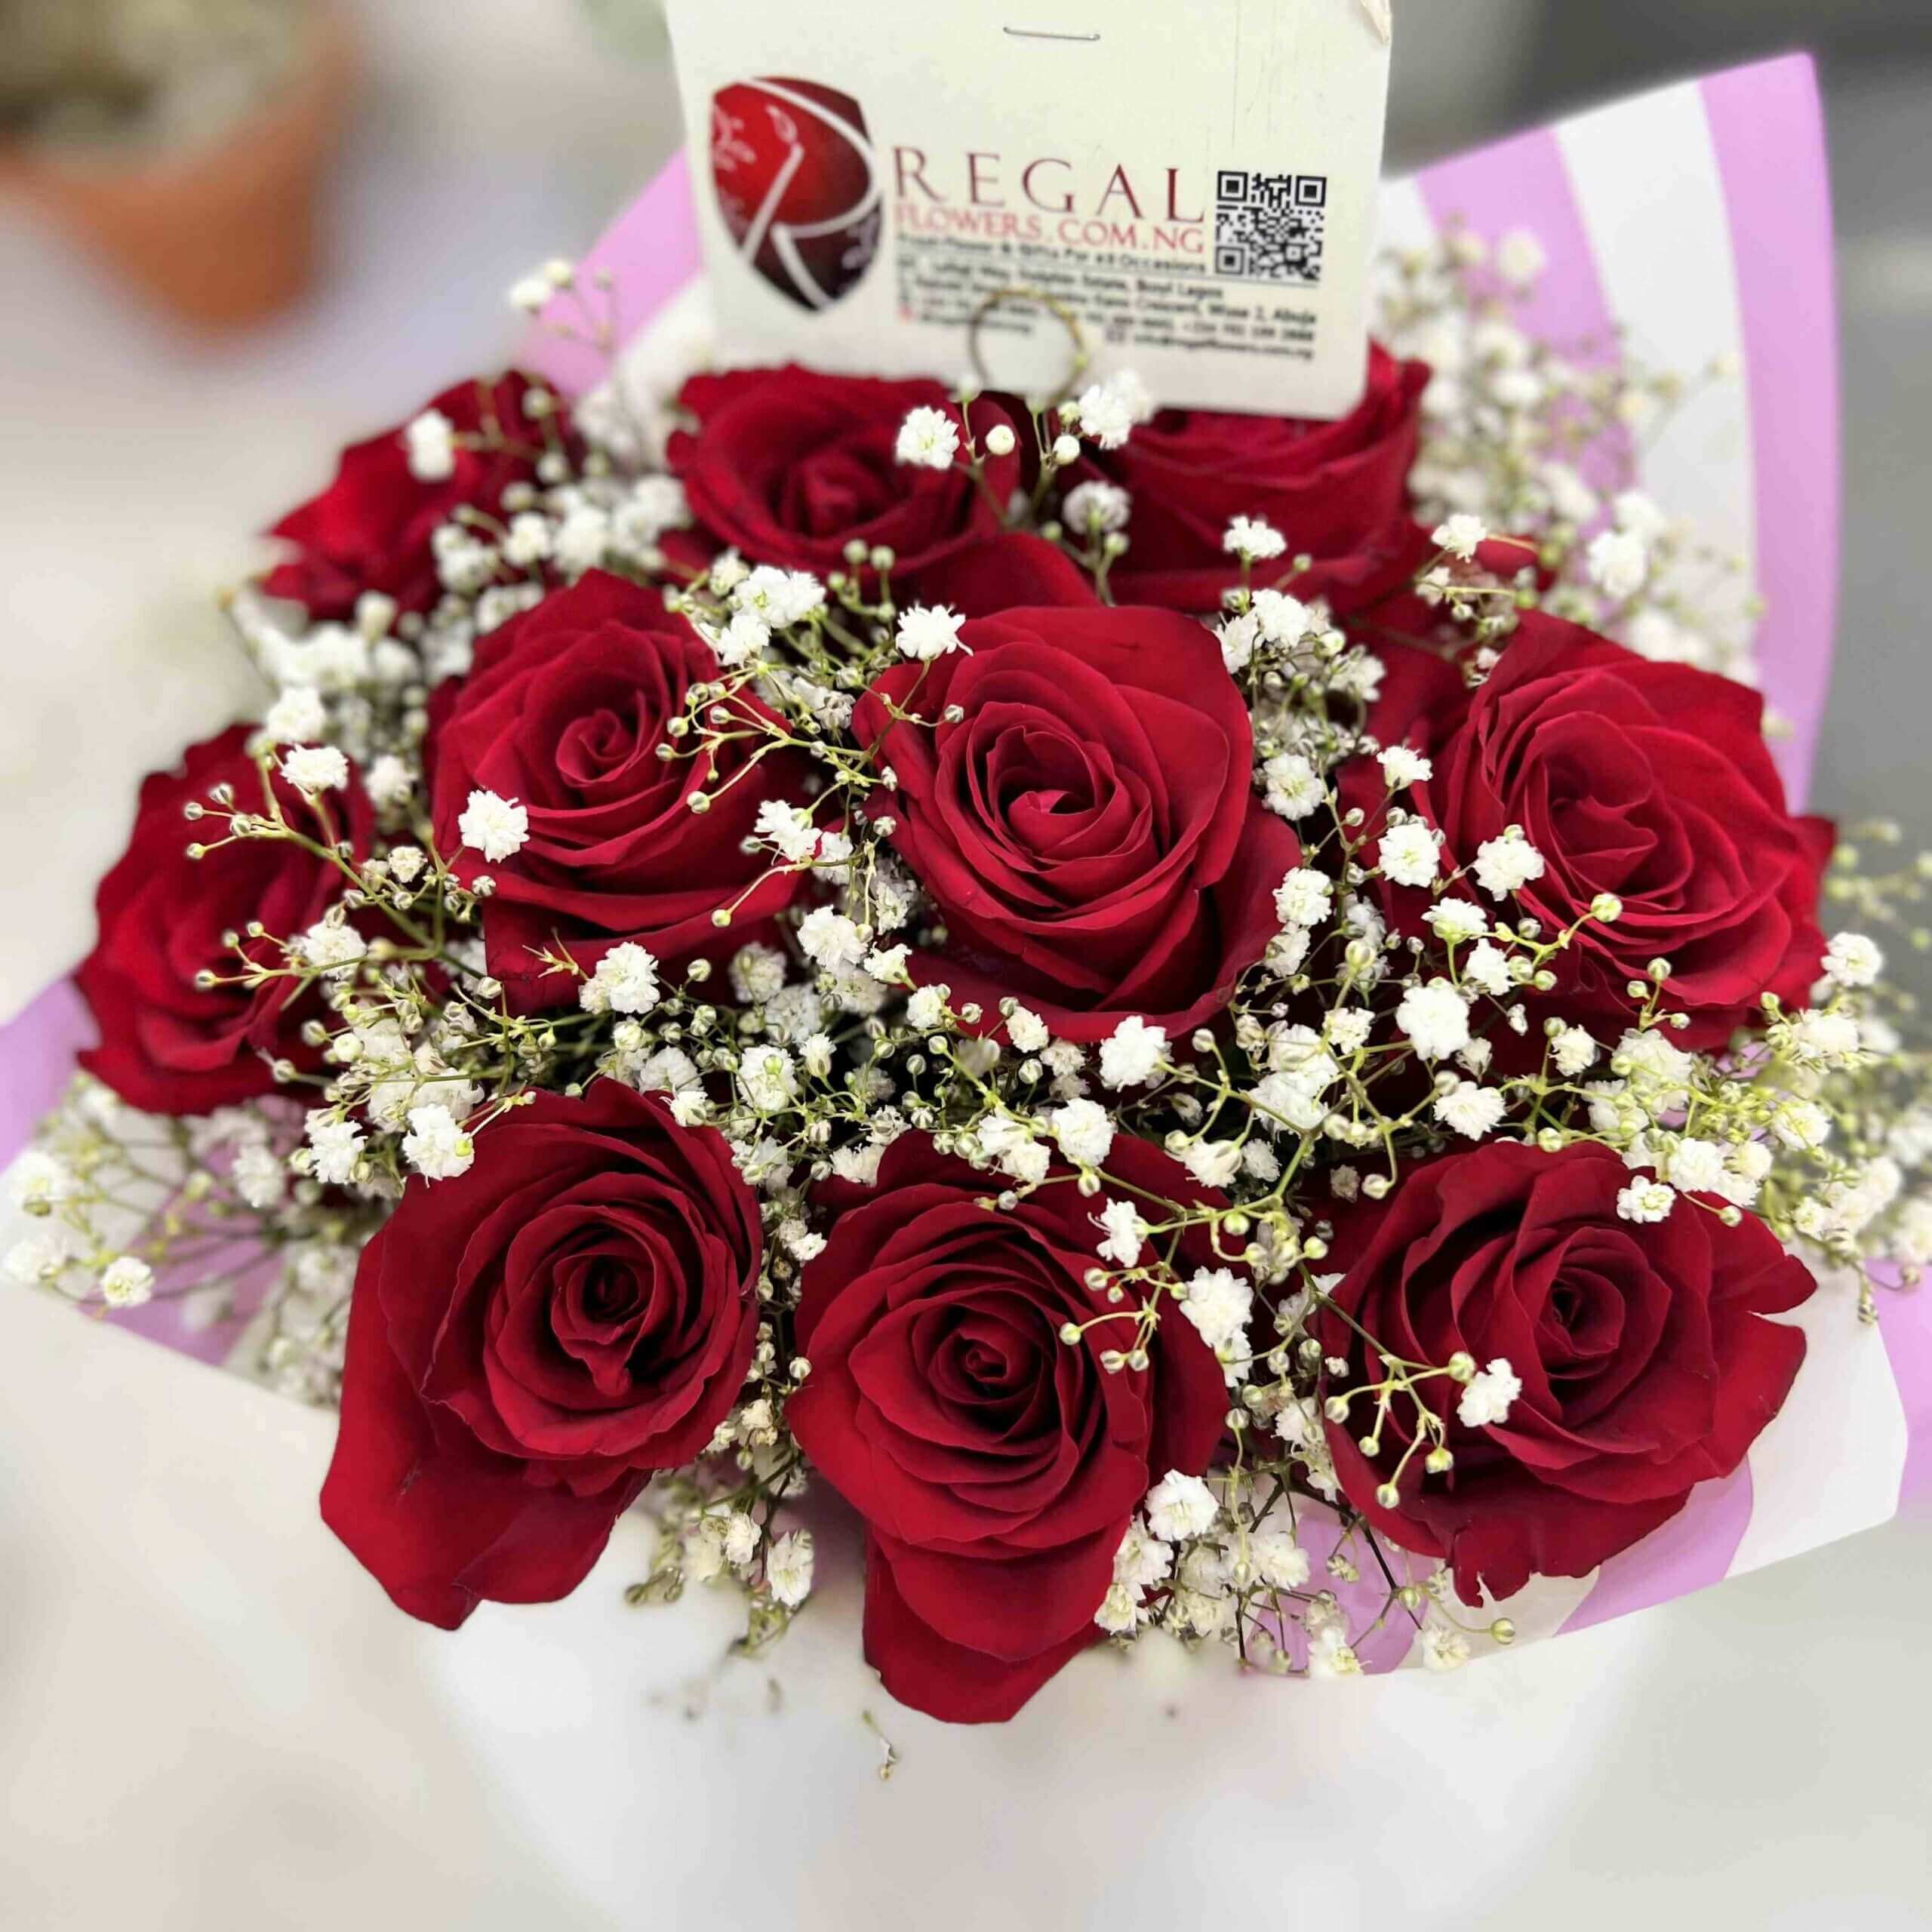 Regal Roses are Red_11zon